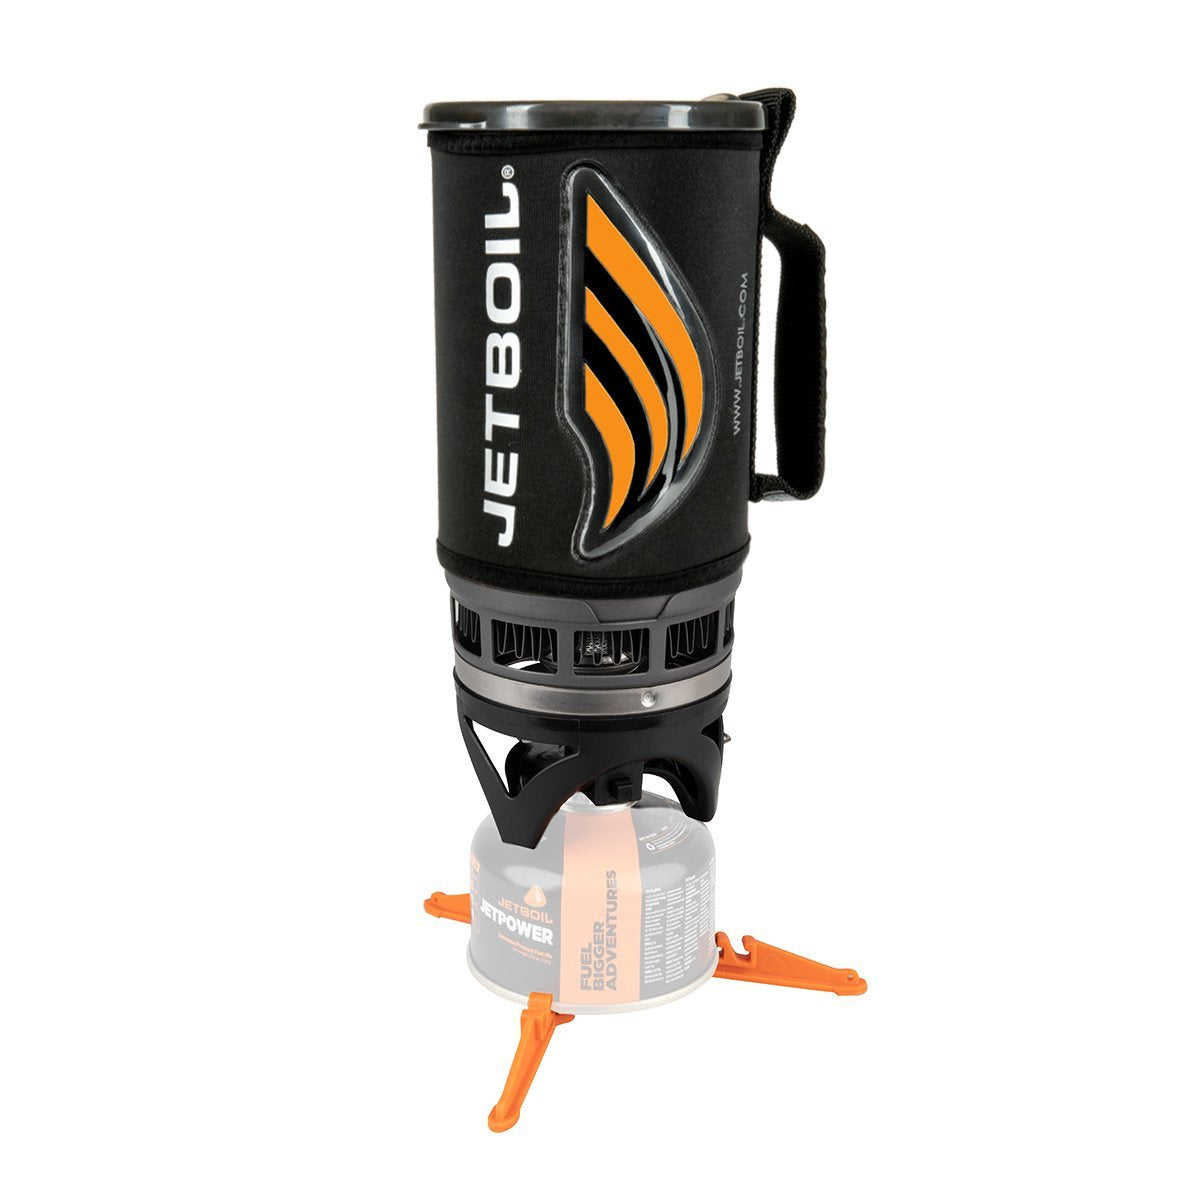 Jetboil Flash Complete Cooking System Outdoor and Survival Products Jetboil Tactical Gear Supplier Tactical Distributors Australia